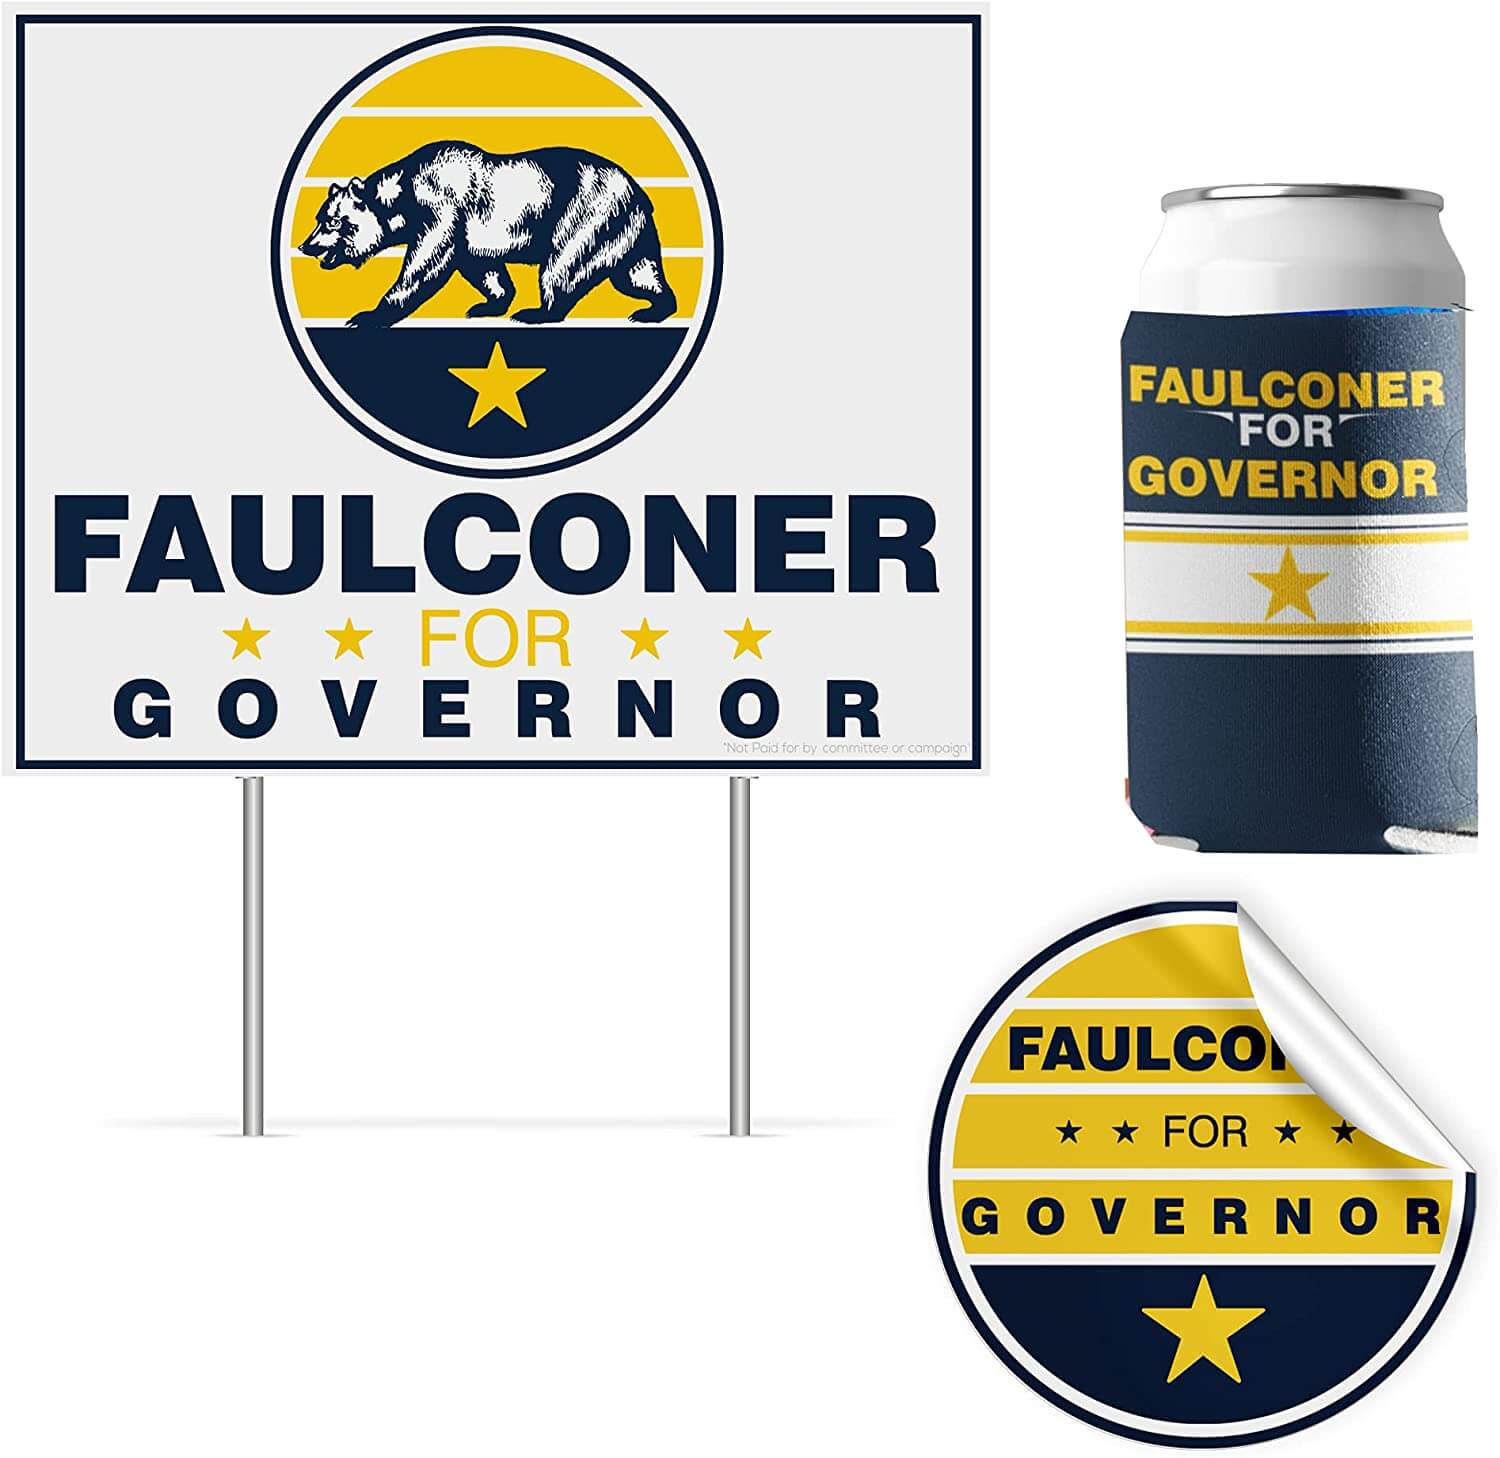 faulconer for governor